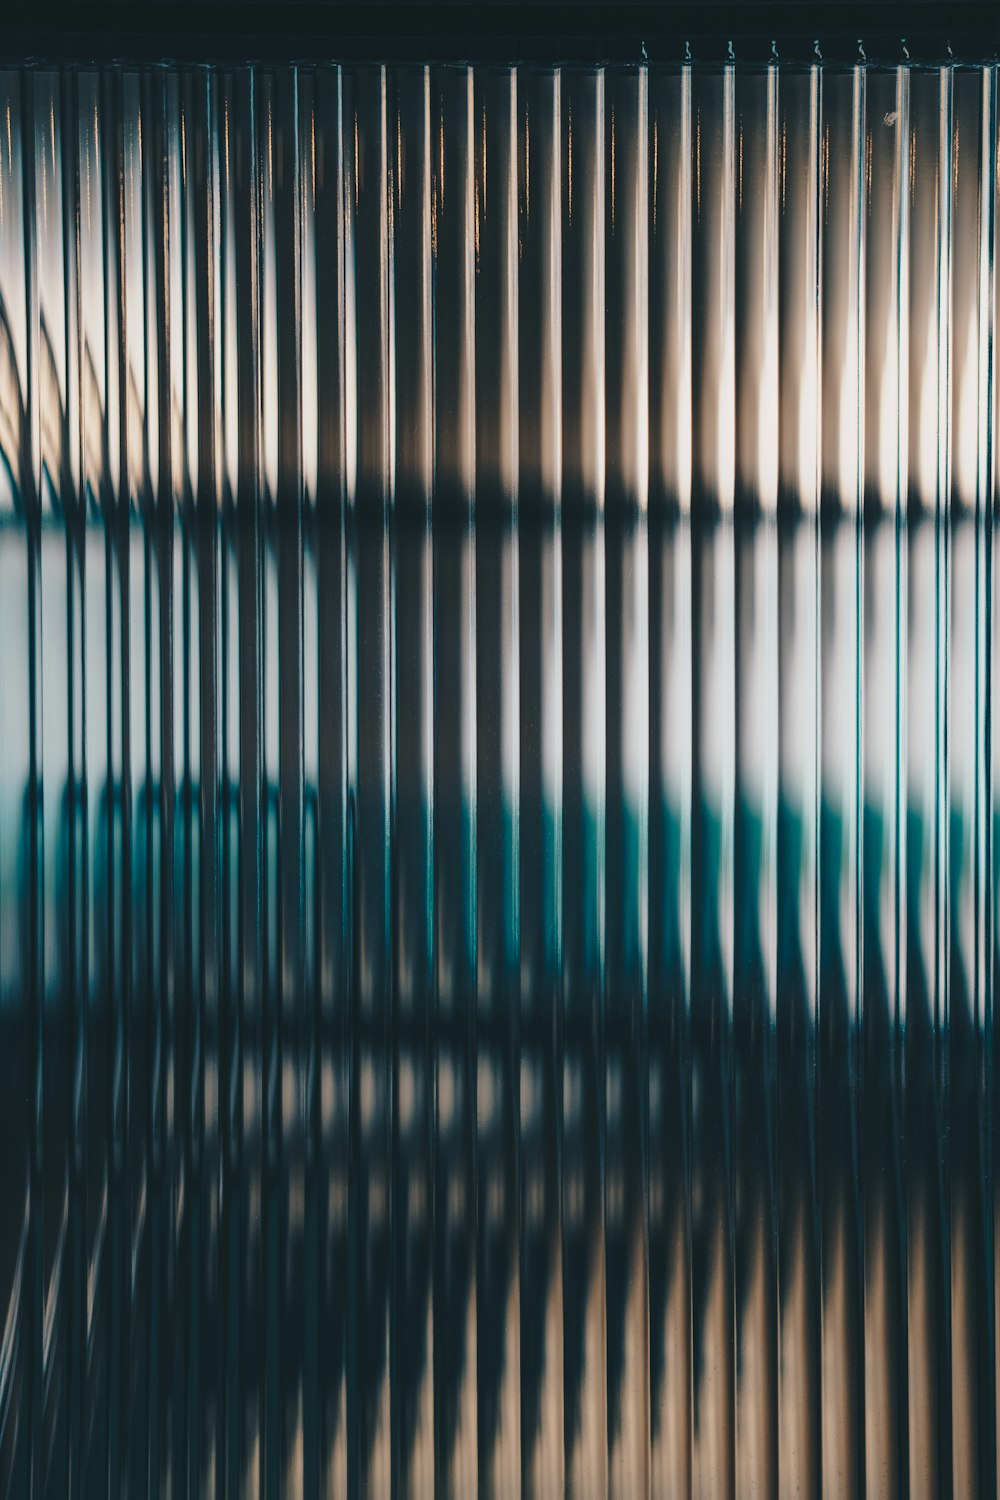 a blurry image of a window with bars on it